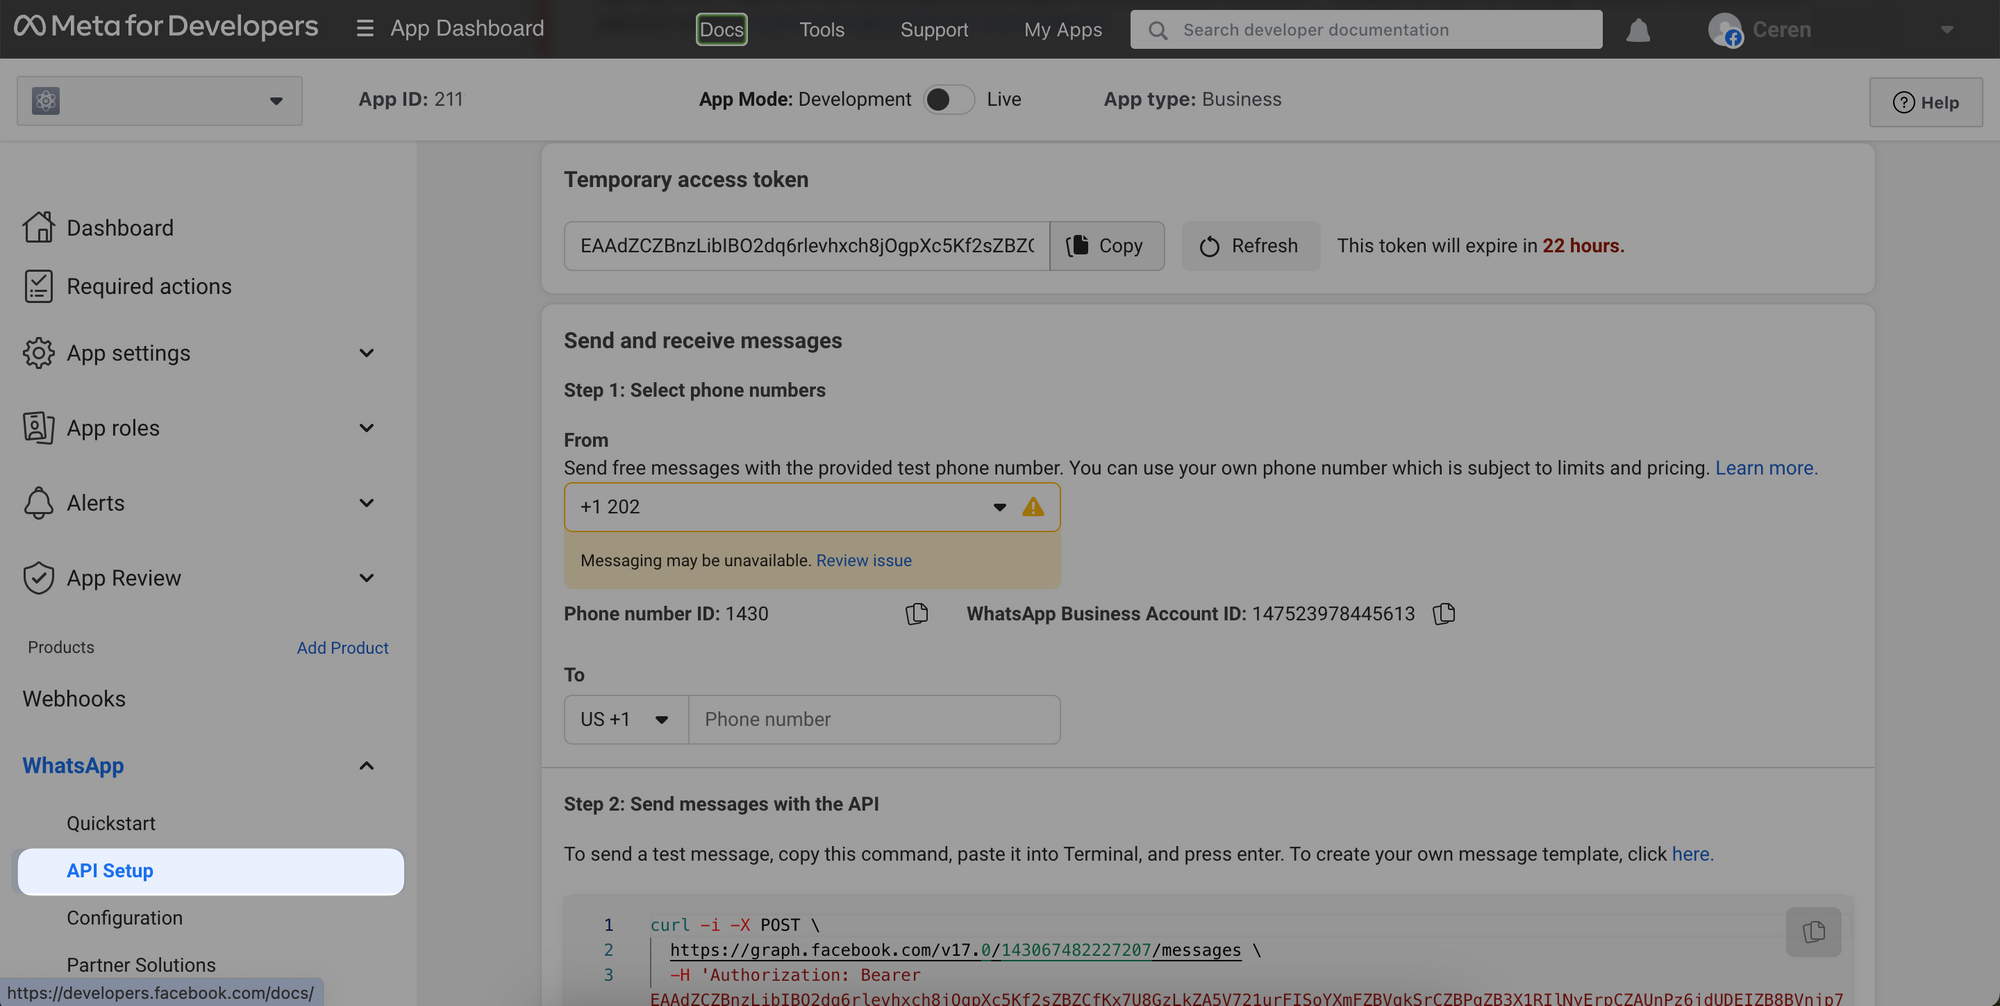 WhatsApp section in Meta for Developers from the API Setup part